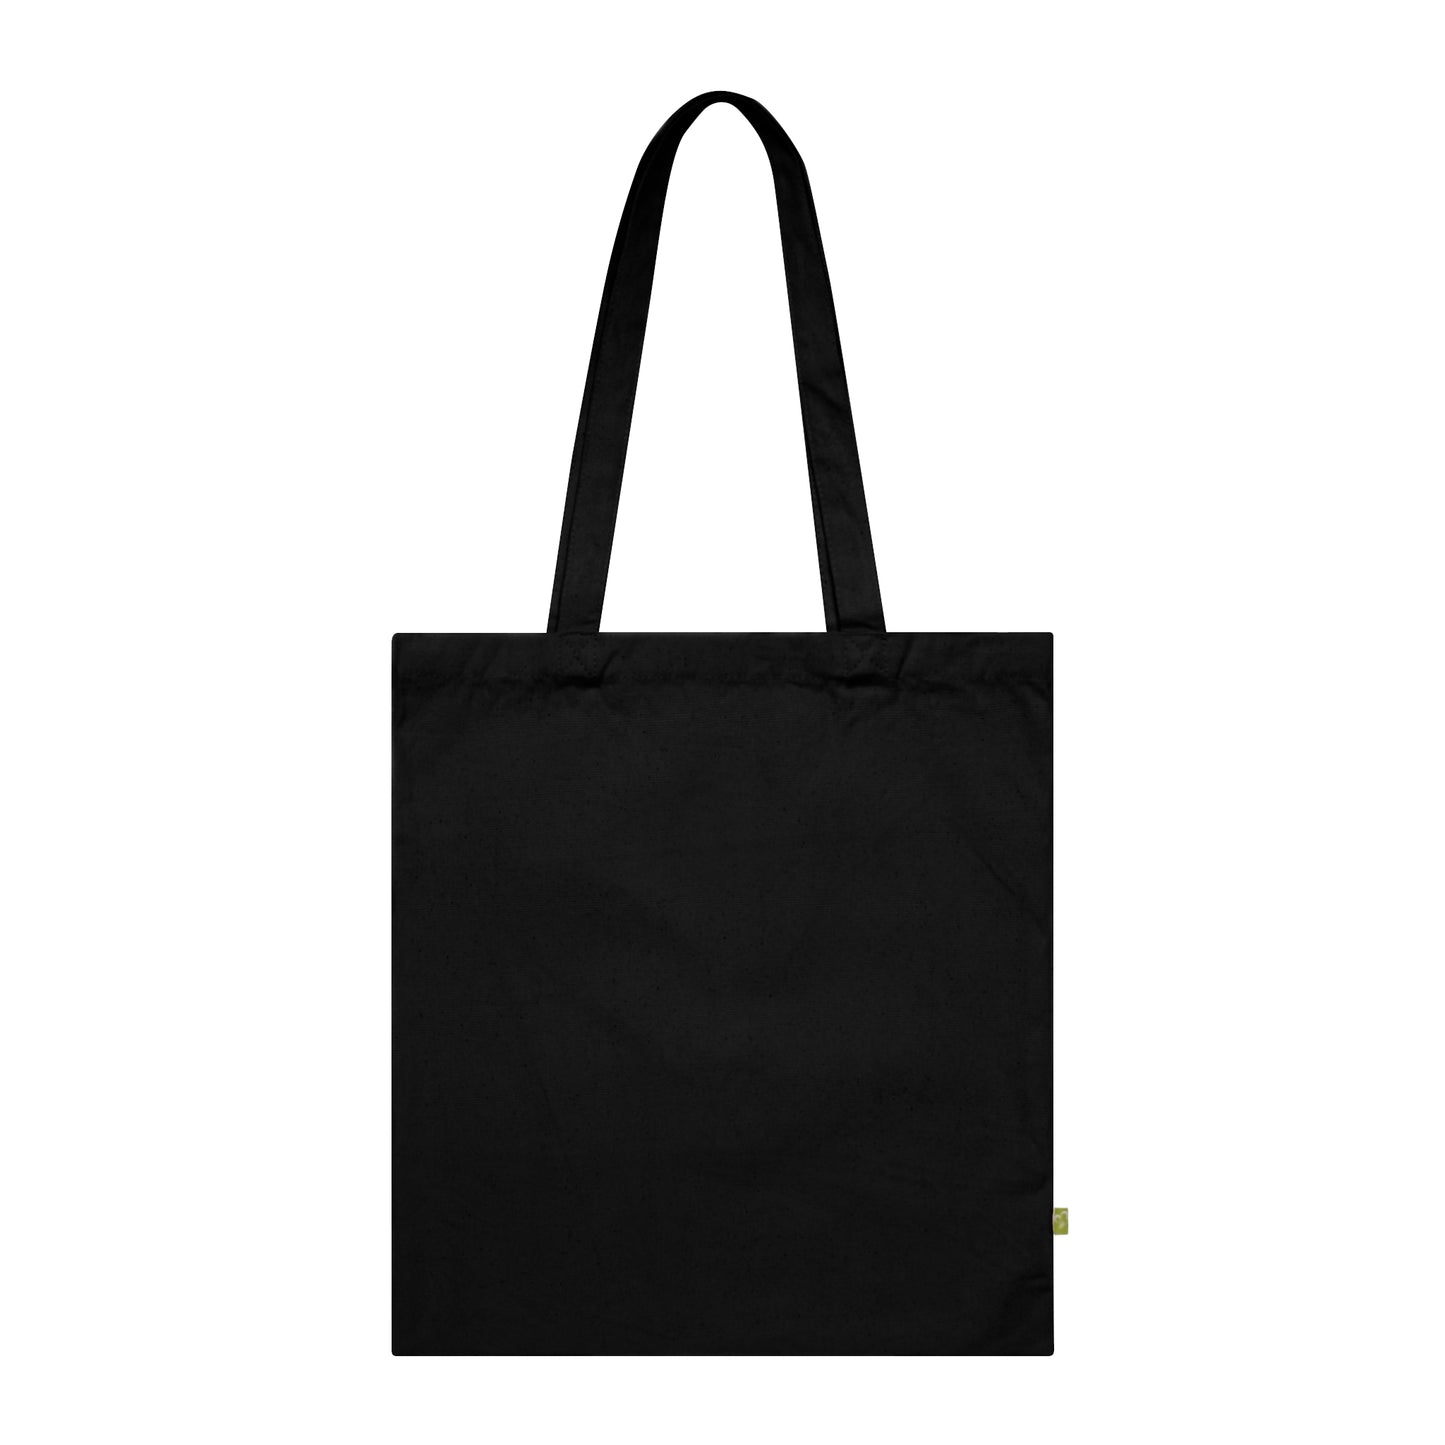 Tote Bag IT Support Green - Frogos Design